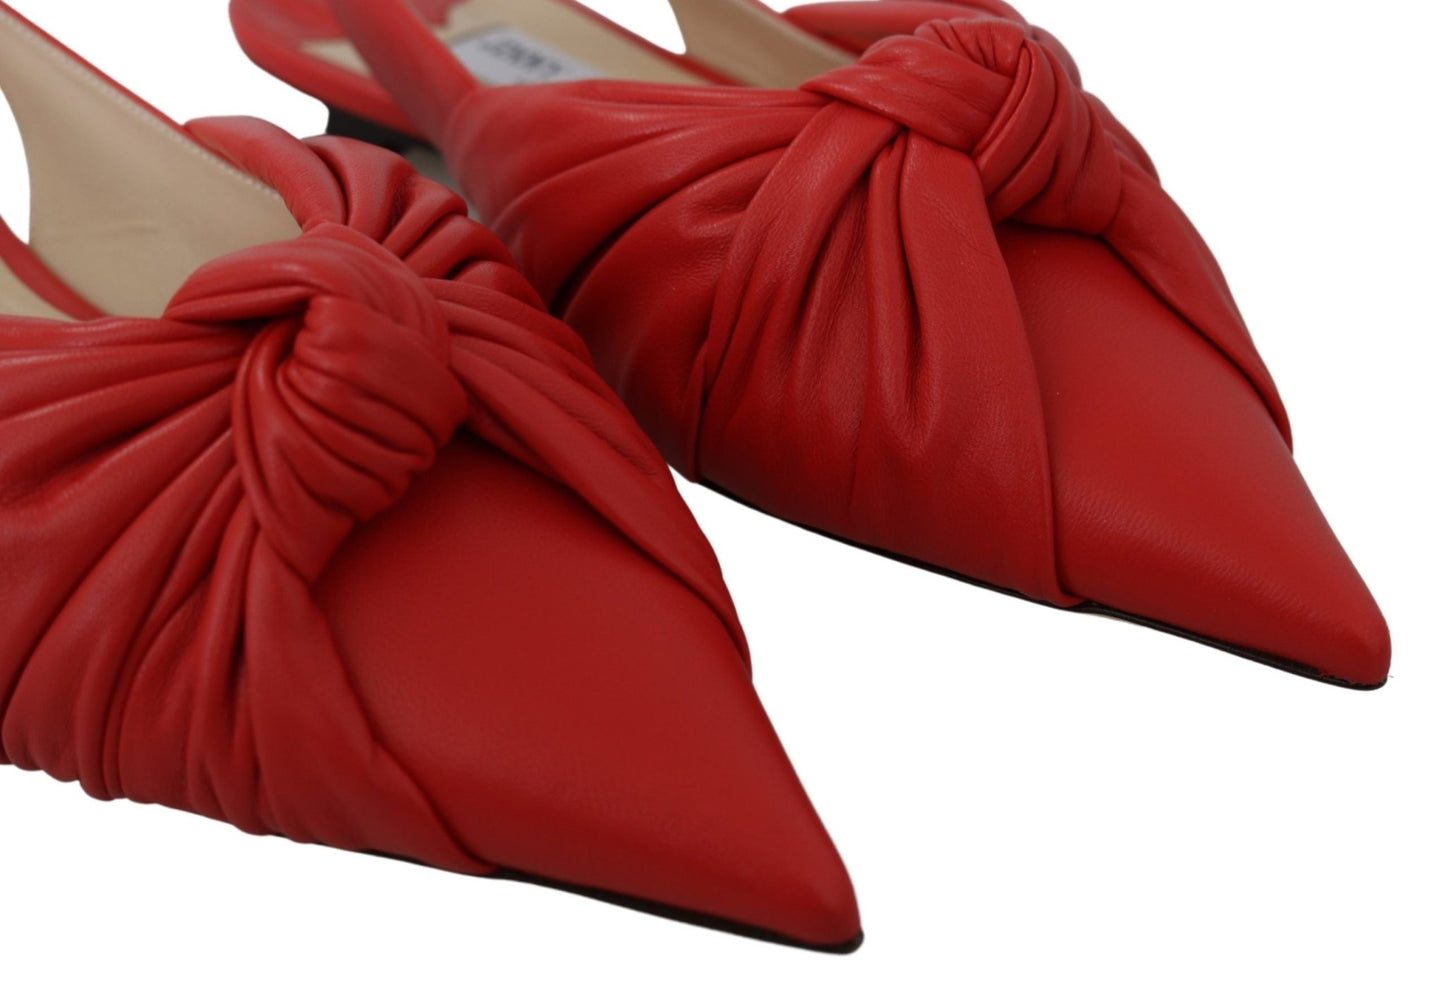 Jimmy Choo Chic Red Pointed Toe Leather Flats